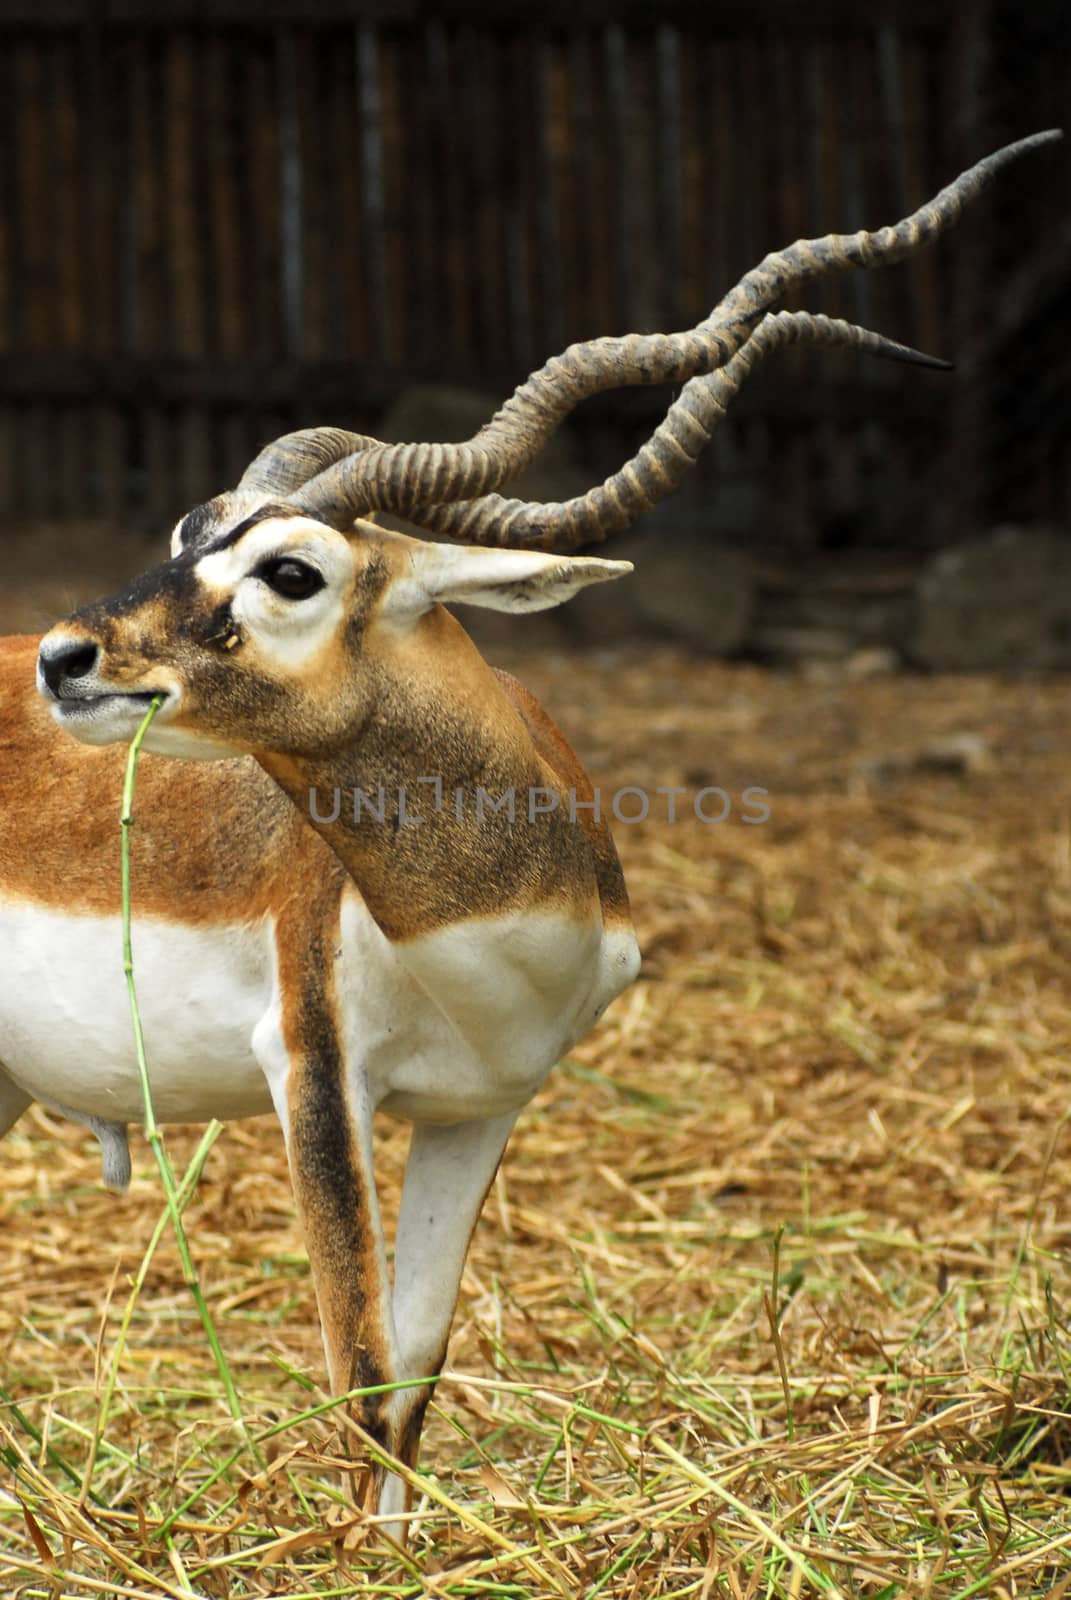 African antelope in a zoo by think4photop